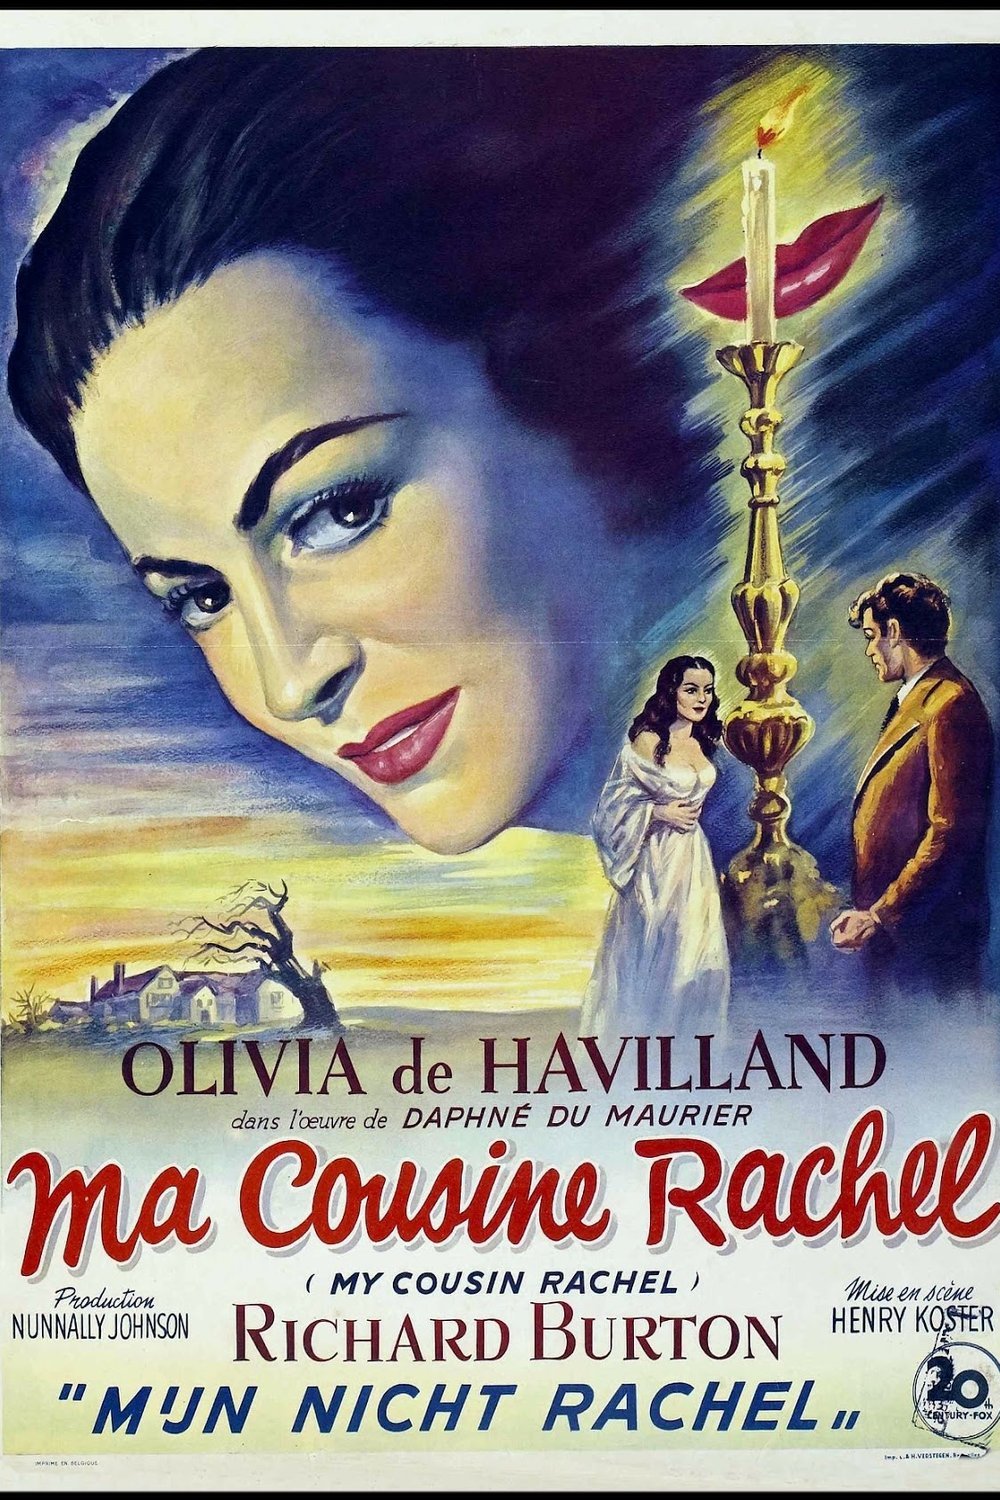 Poster of the movie My Cousin Rachel